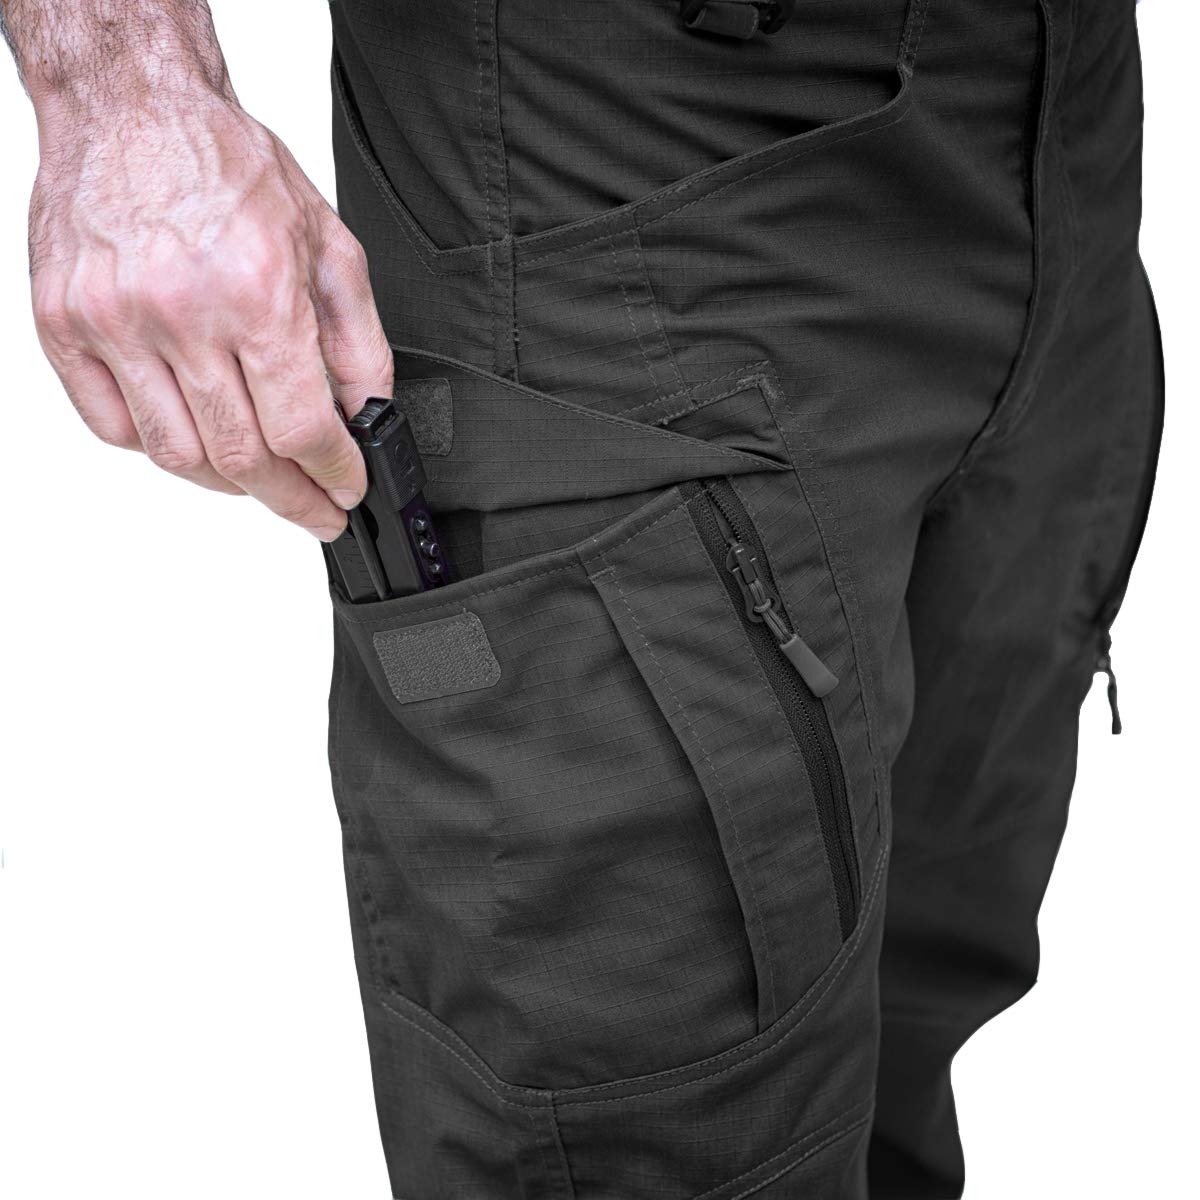 CARWORNIC Men's Outdoor Tactical Pants Rip-Stop Lightweight Stretch Military Cargo Work Hiking Pants Black